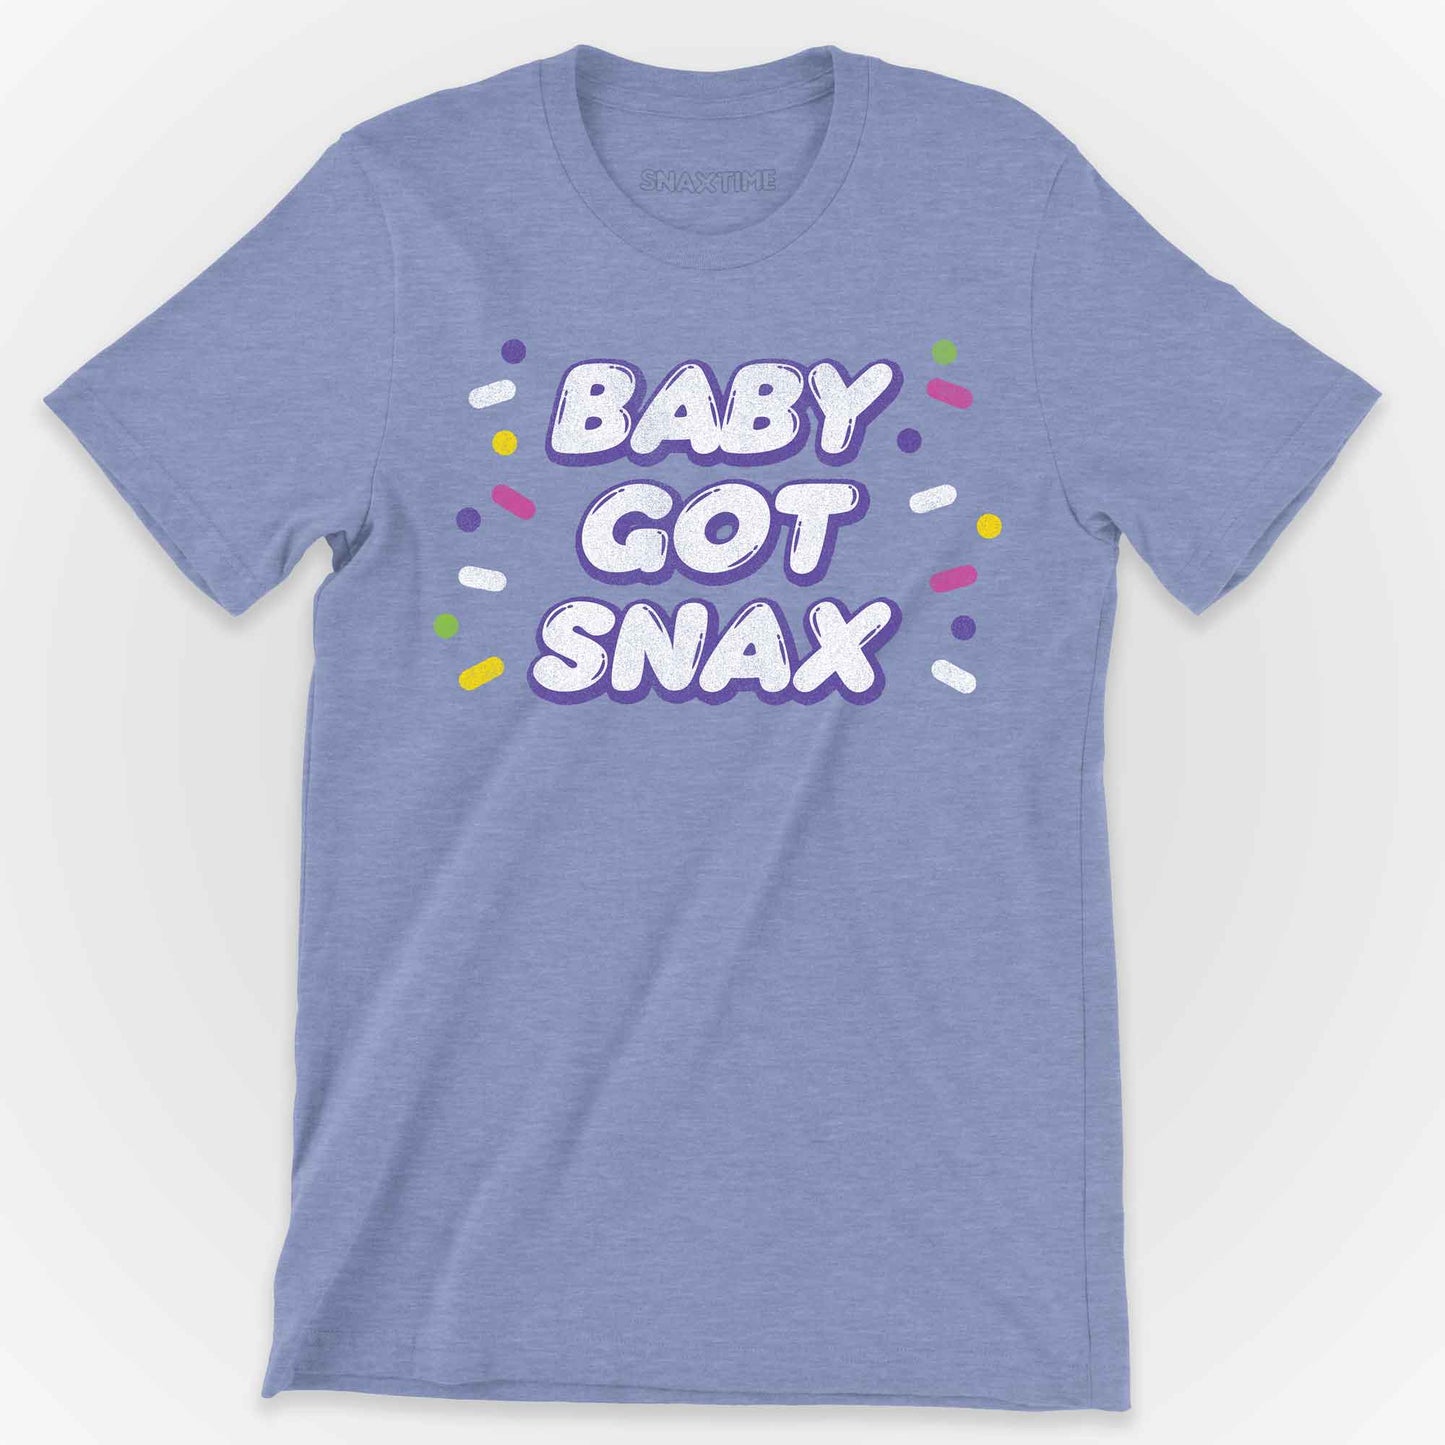 Heather Blue Baby Got Snax Retro Rap Candy Graphic T-Shirt by Snaxtime